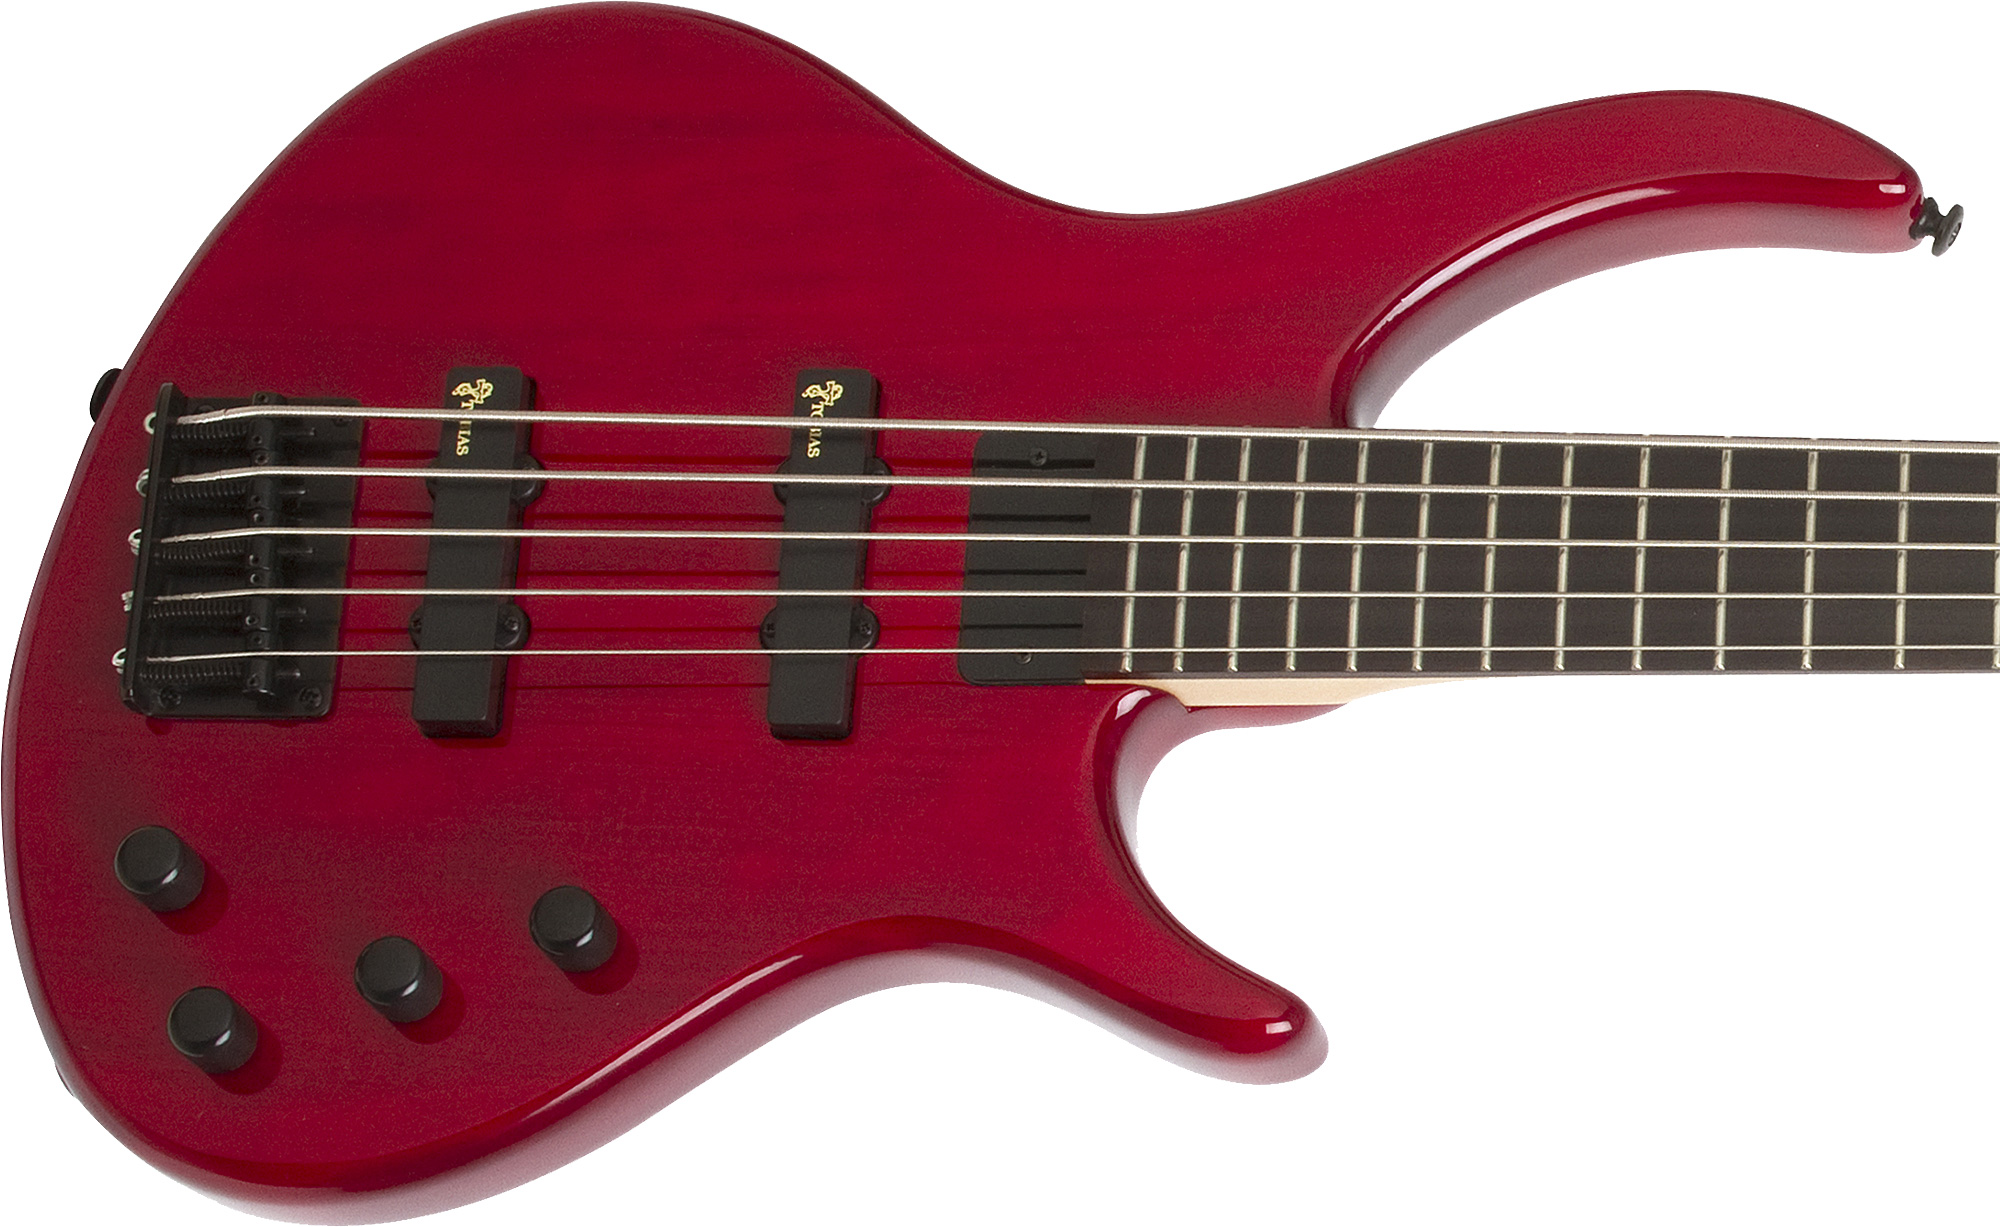 Epiphone Toby Deluxe V Bass Bh - Trans Red - Solidbody E-bass - Variation 1